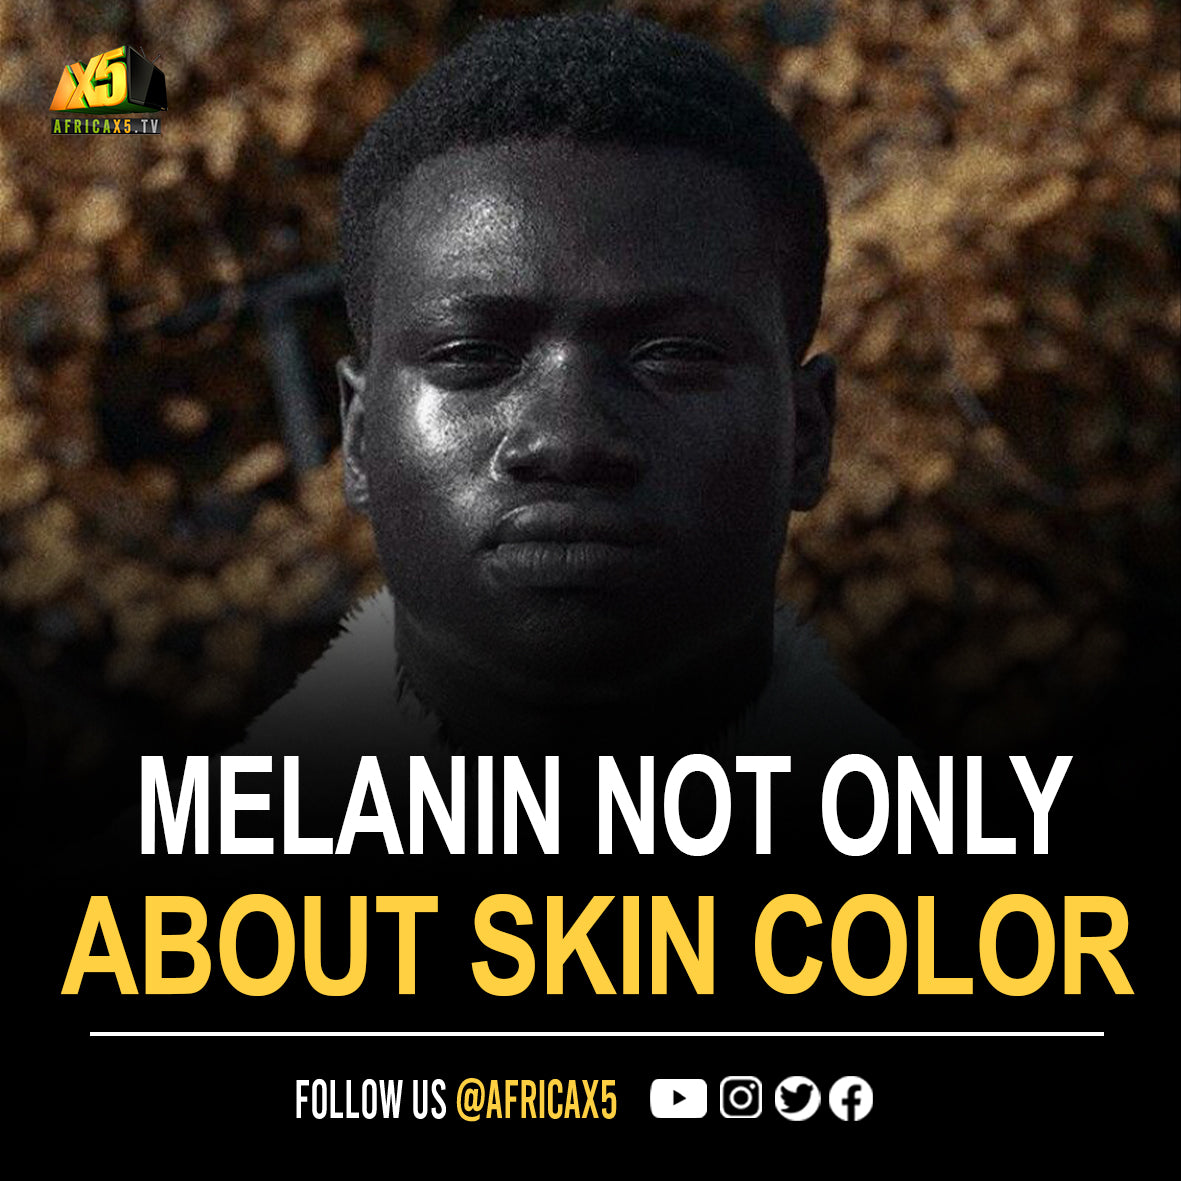 Melanin is not only about skin color. Scholars focus on that to hide all its greatness because it benefits Africans.